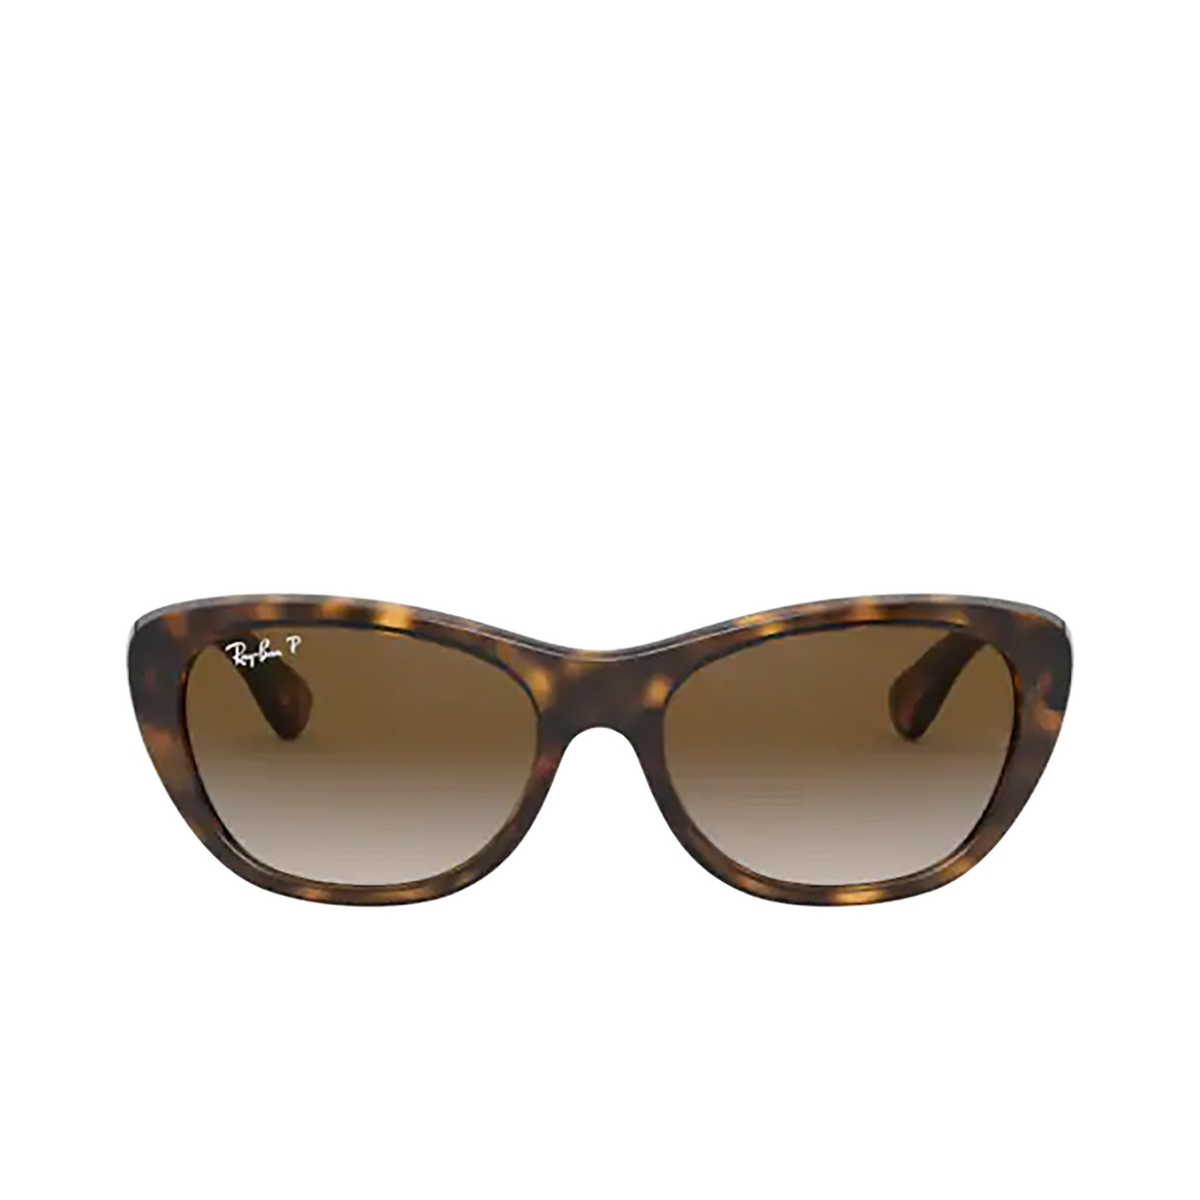 Ray-Ban RB4227 Sunglasses 710/T5 LIGHT HAVANA - front view